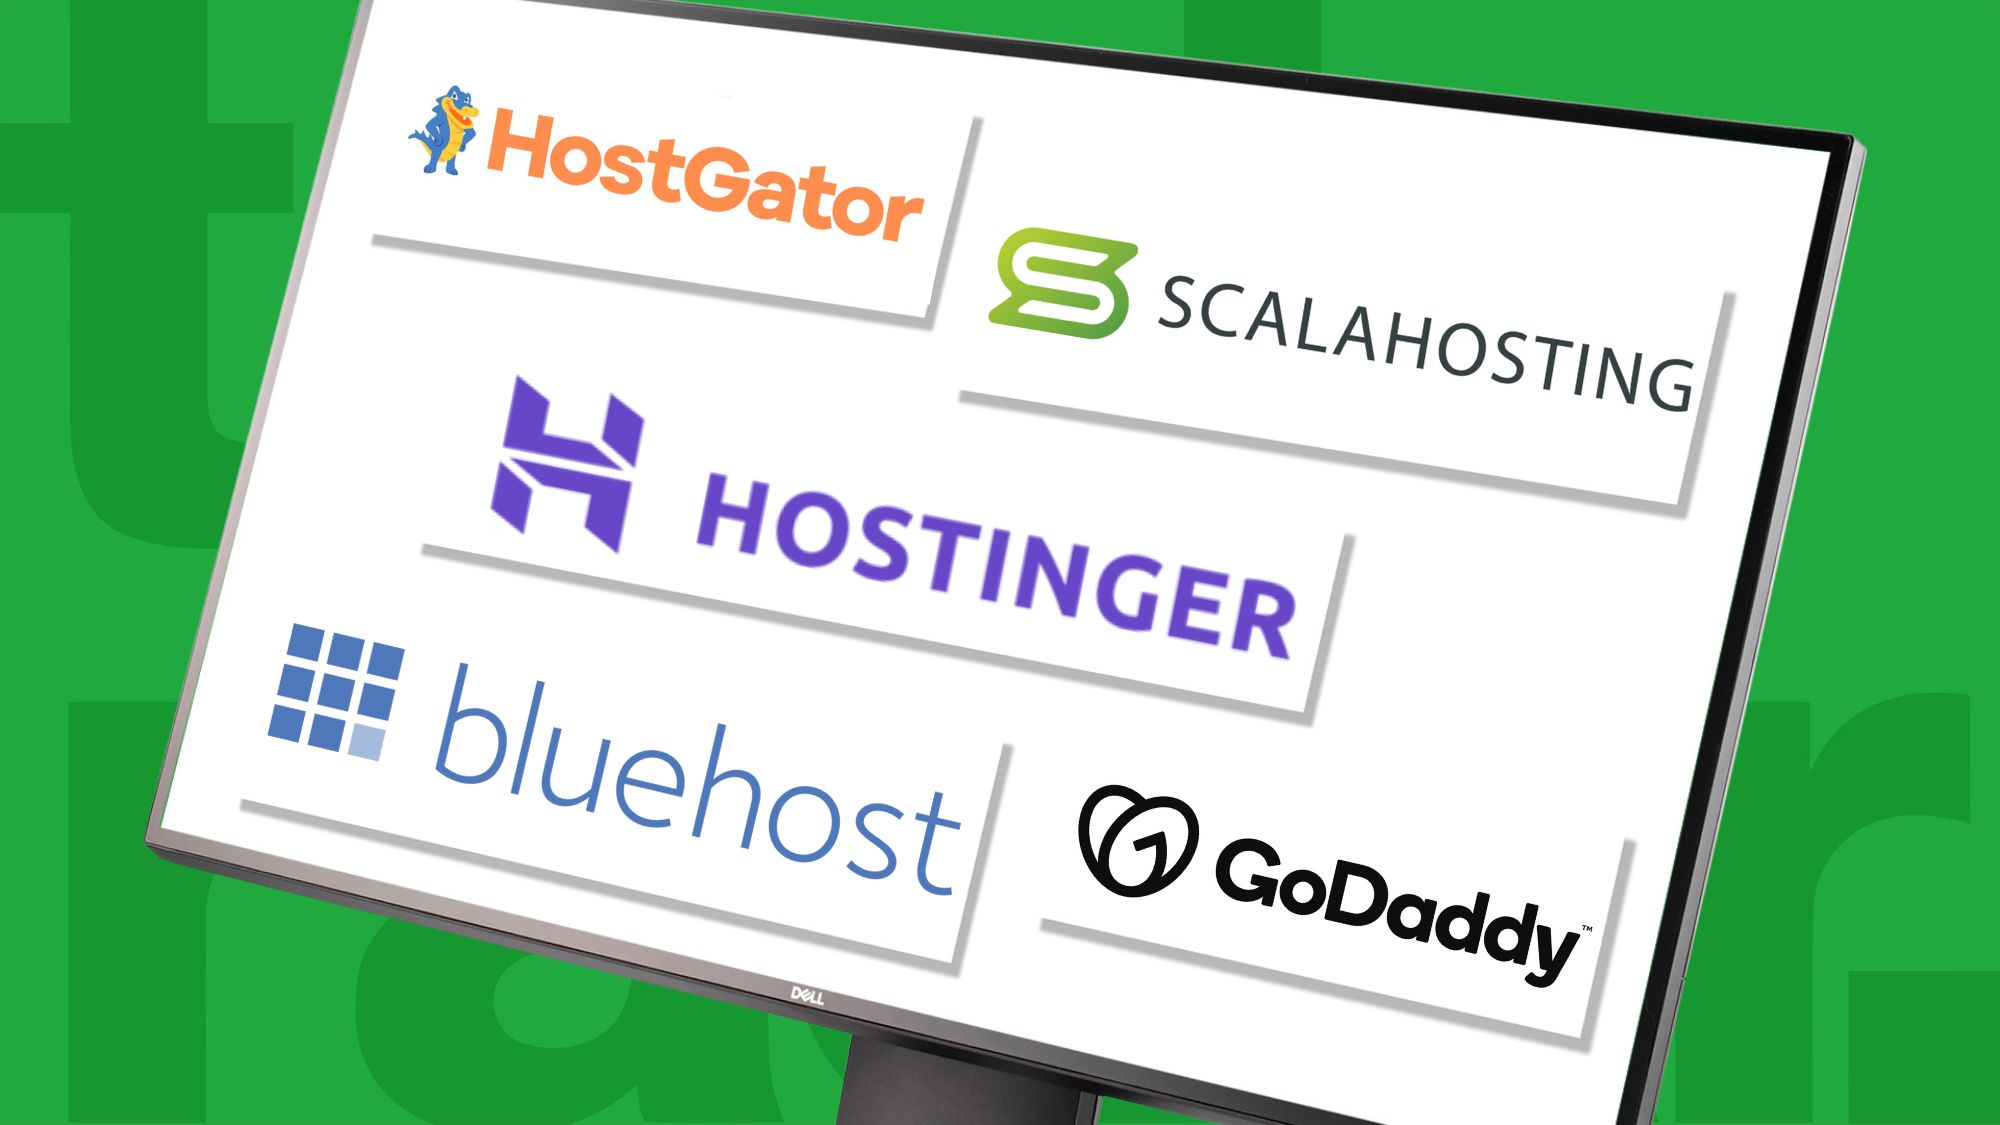 web hosting 2023: Our experts review the top services | TechRadar